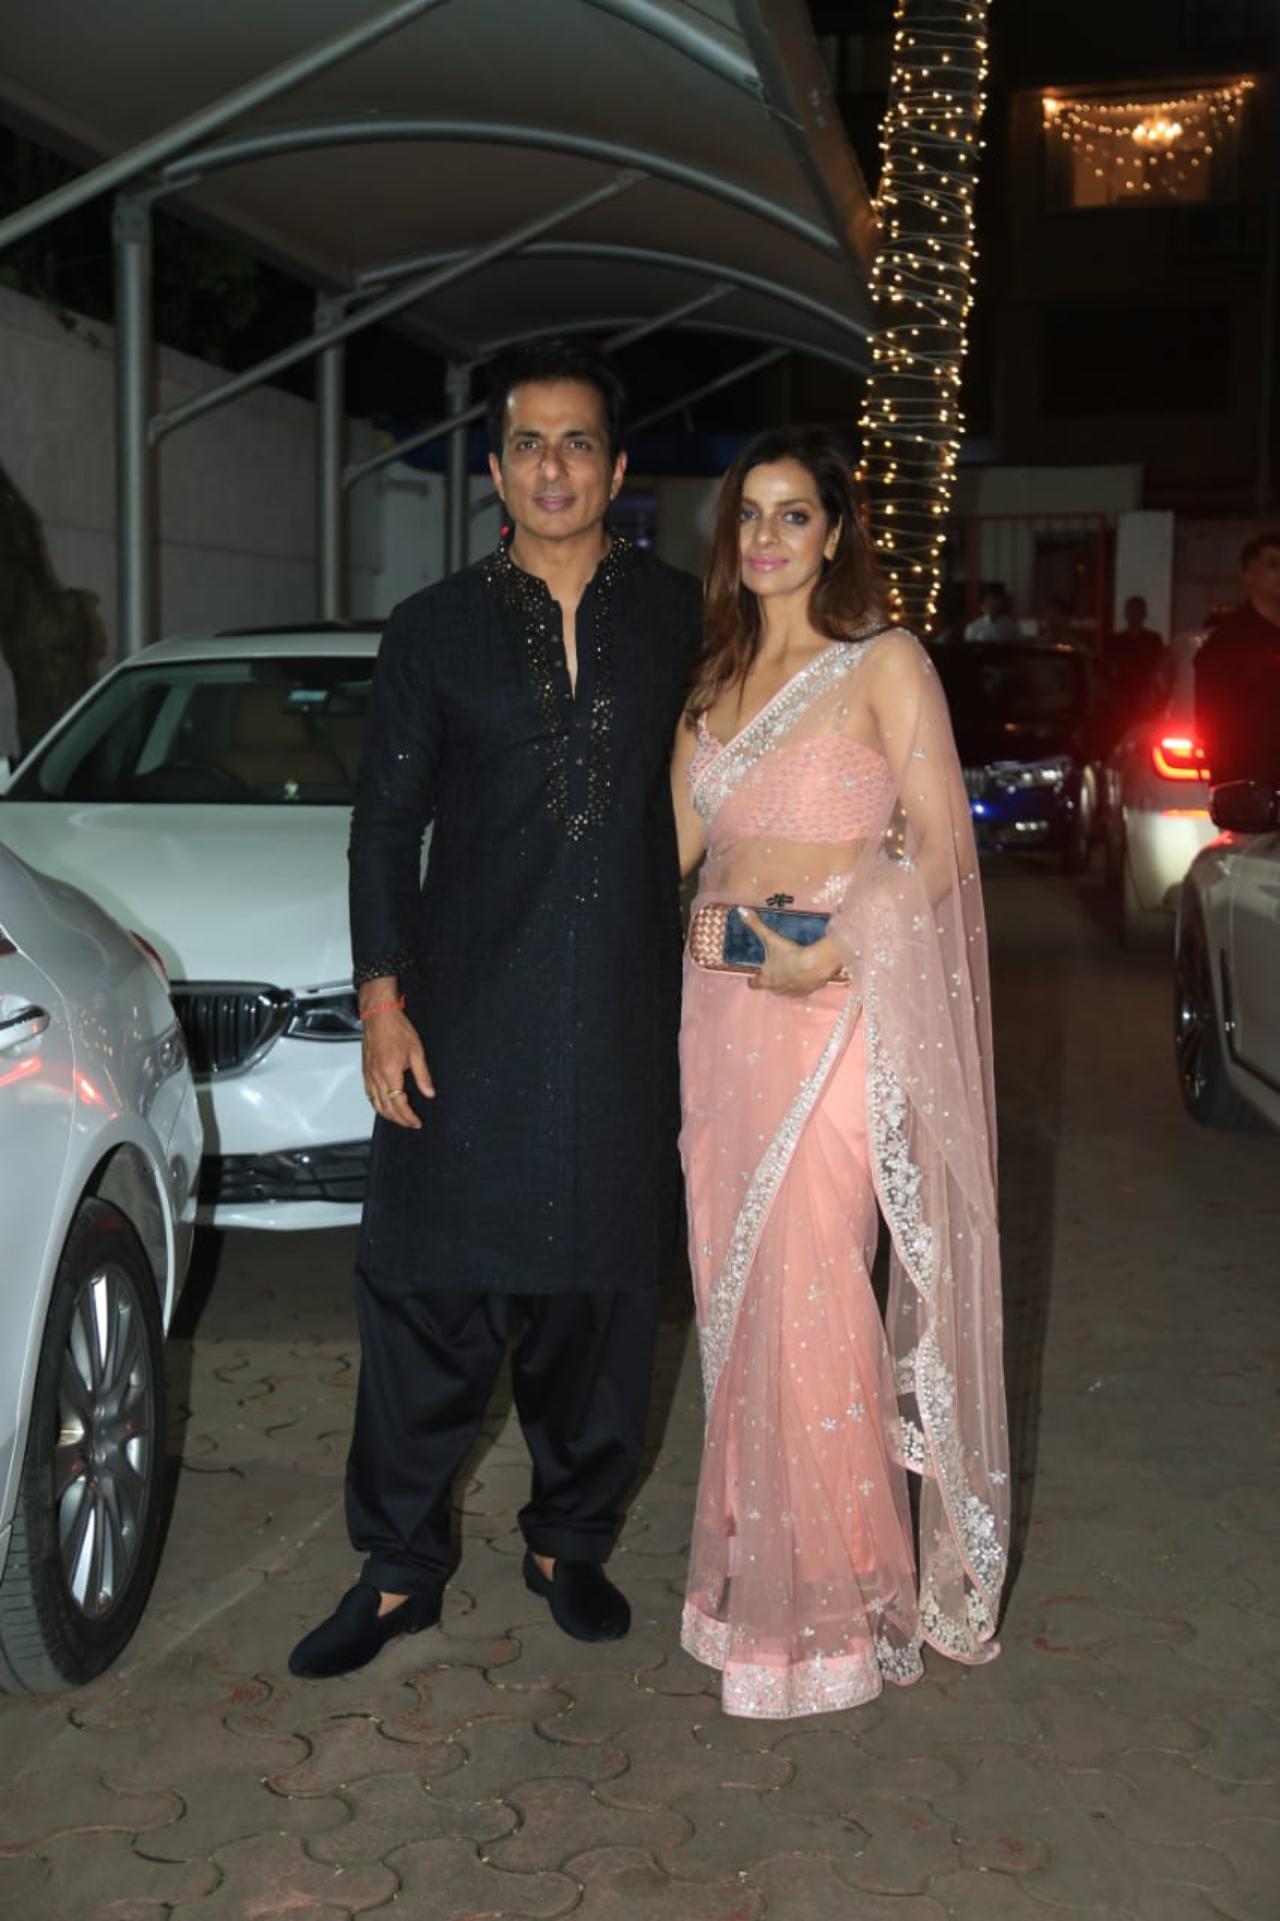 Sonu Sood arrived with his wife for the party